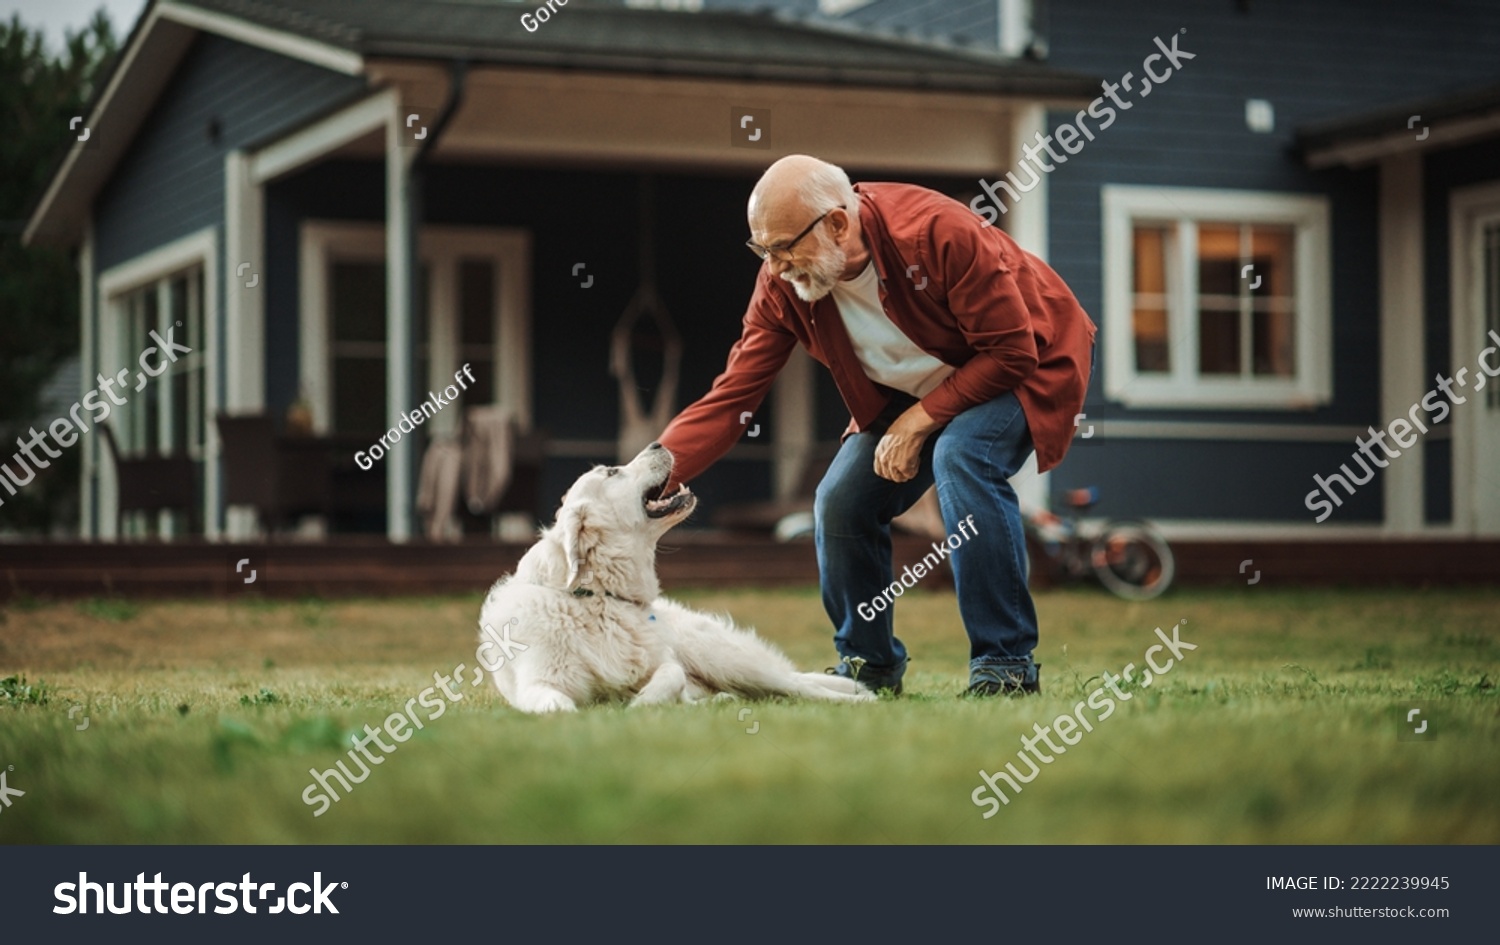 Cheerful Senior Man Enjoying Time Outside with a Pet Dog, Petting a Playful White Golden Retriever. Happy Adult Man Enjoying Leisure Time on a Front Yard in Front of the House. #2222239945